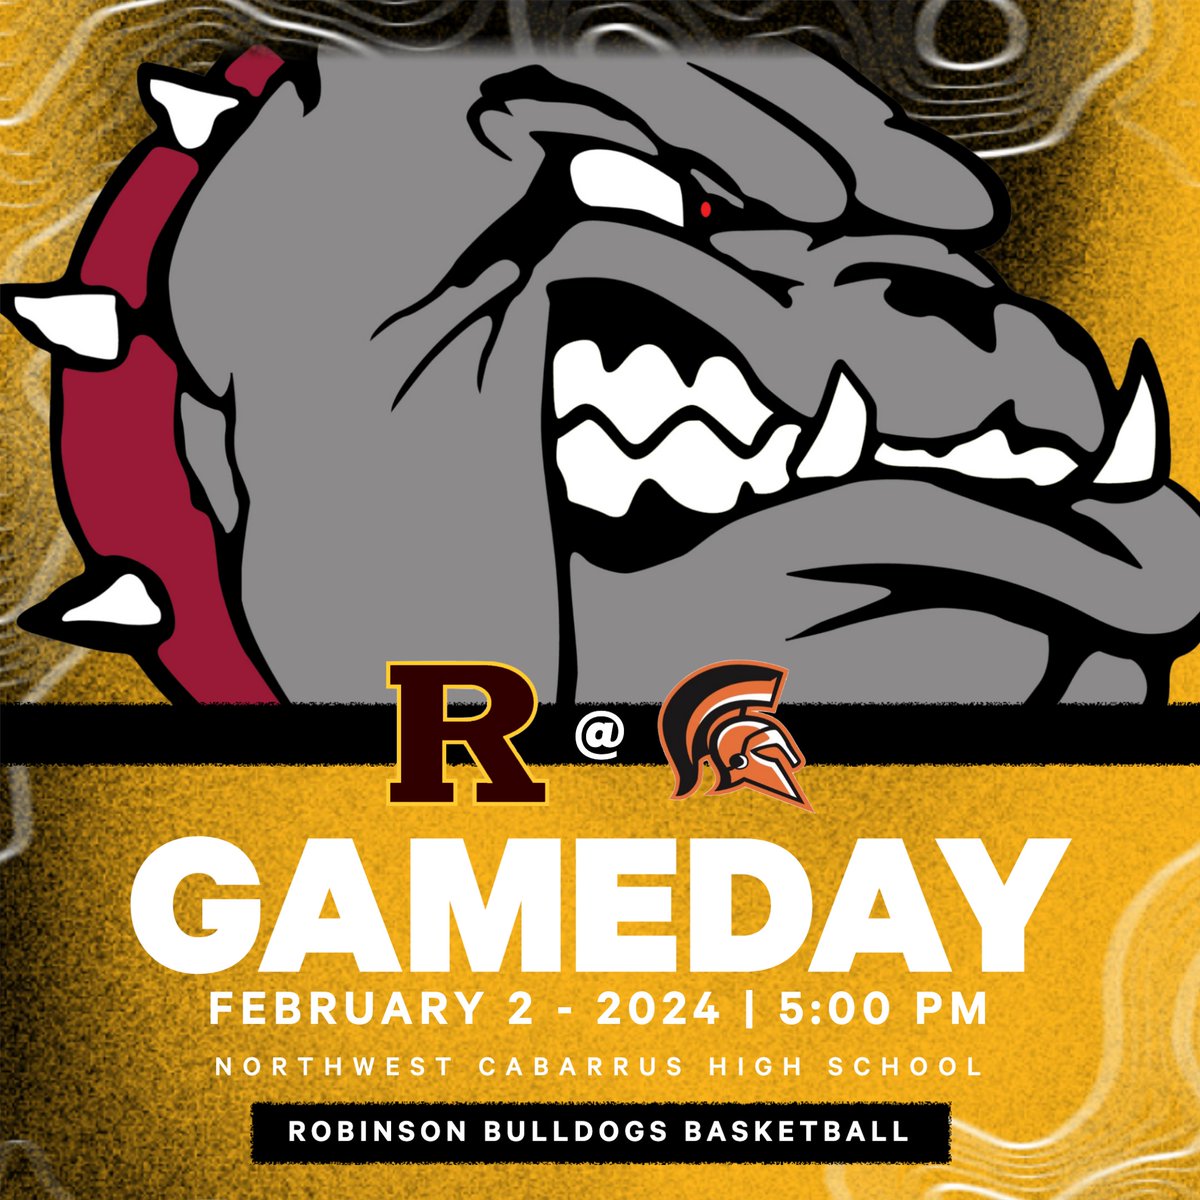 Bulldog Nation...come on out tonight and support your Bulldog Basketball Teams. Game Times: JV MBB @ 5 / WBB @ 6 / MBB @ 7:30